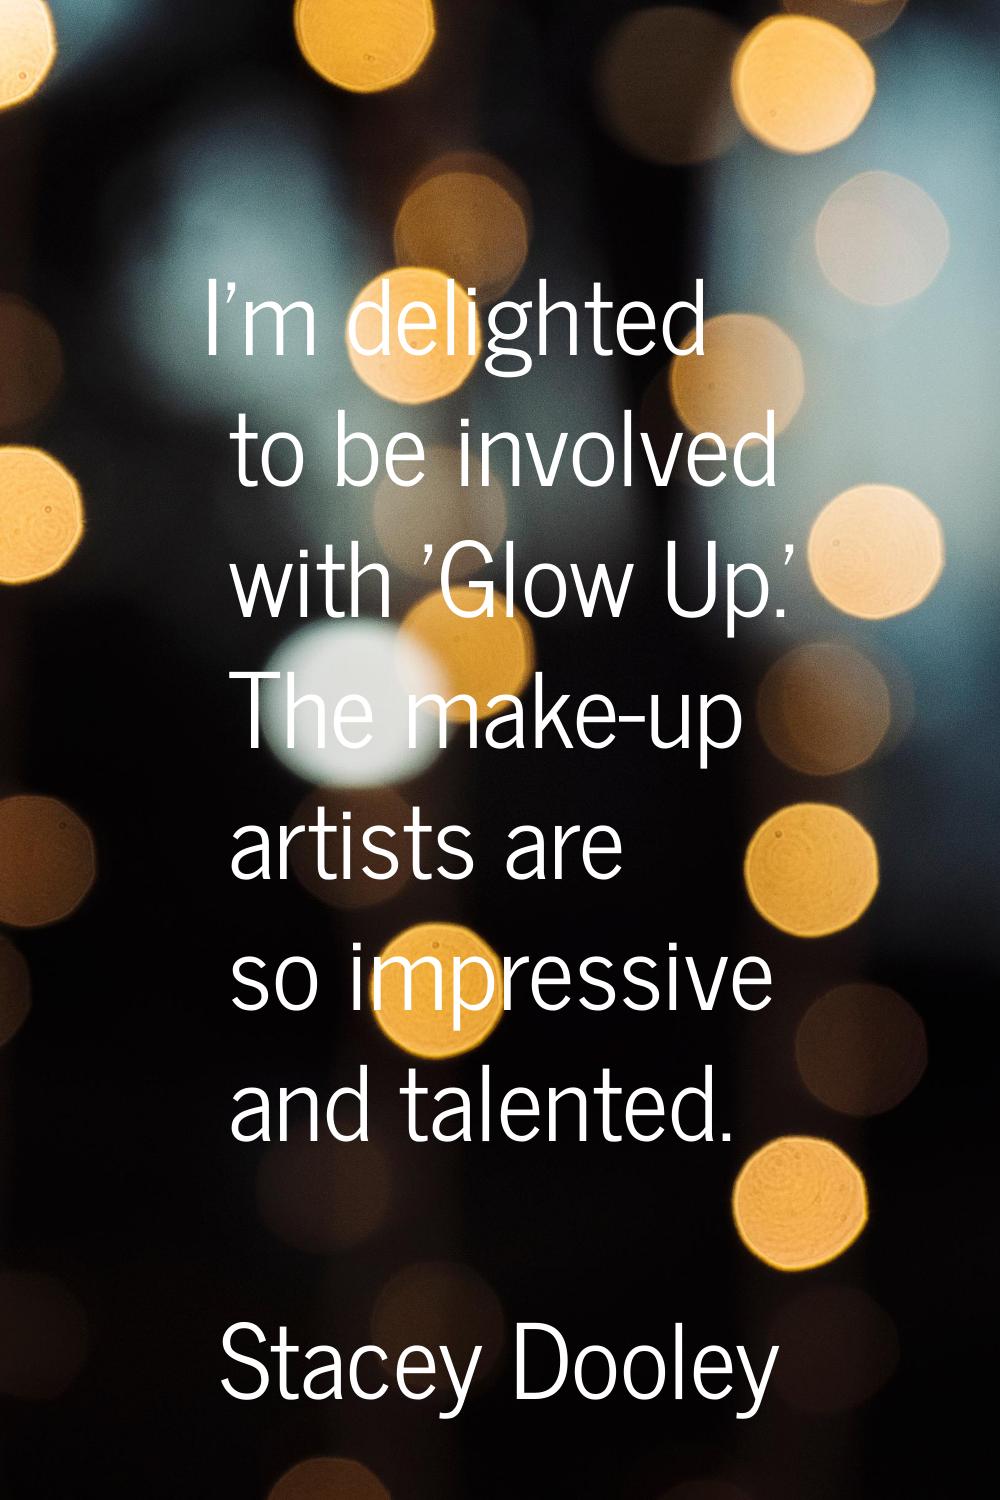 I'm delighted to be involved with 'Glow Up.' The make-up artists are so impressive and talented.